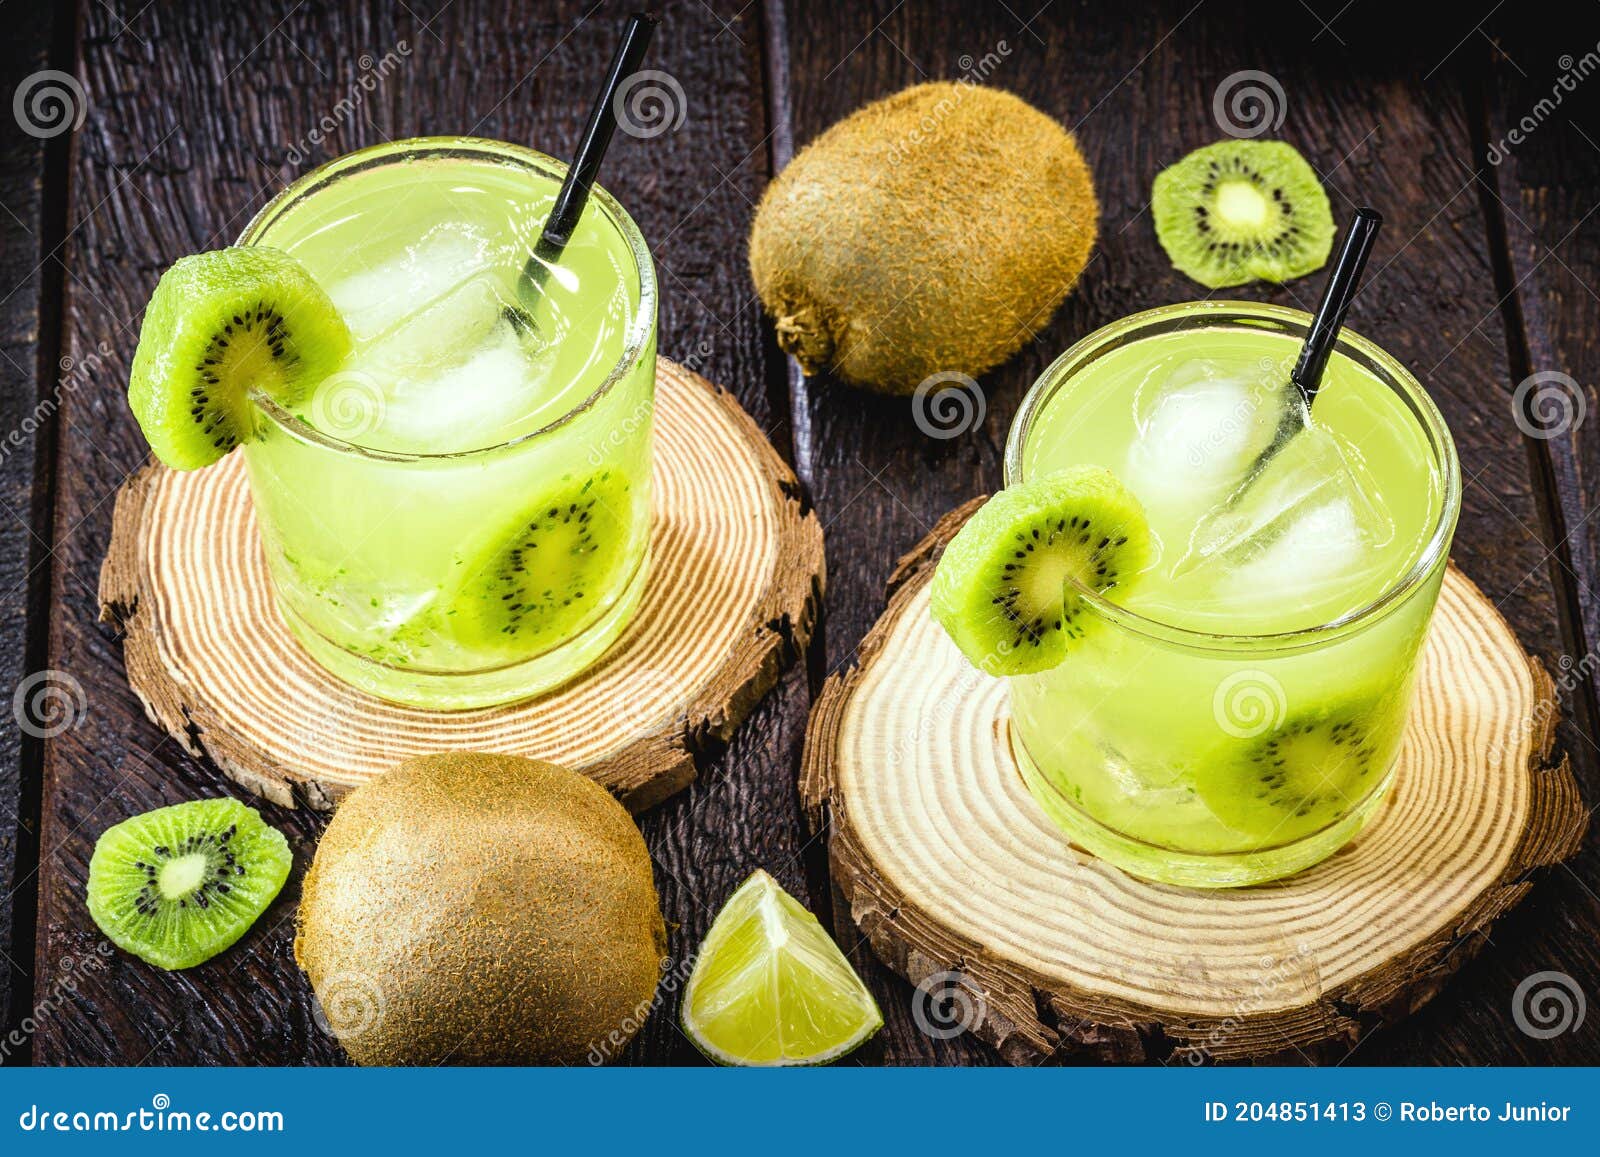 alcoholic drink based on kiwi and aguardente  cocktail based on distilled drink and fruits  called caipirinha in brazil and in